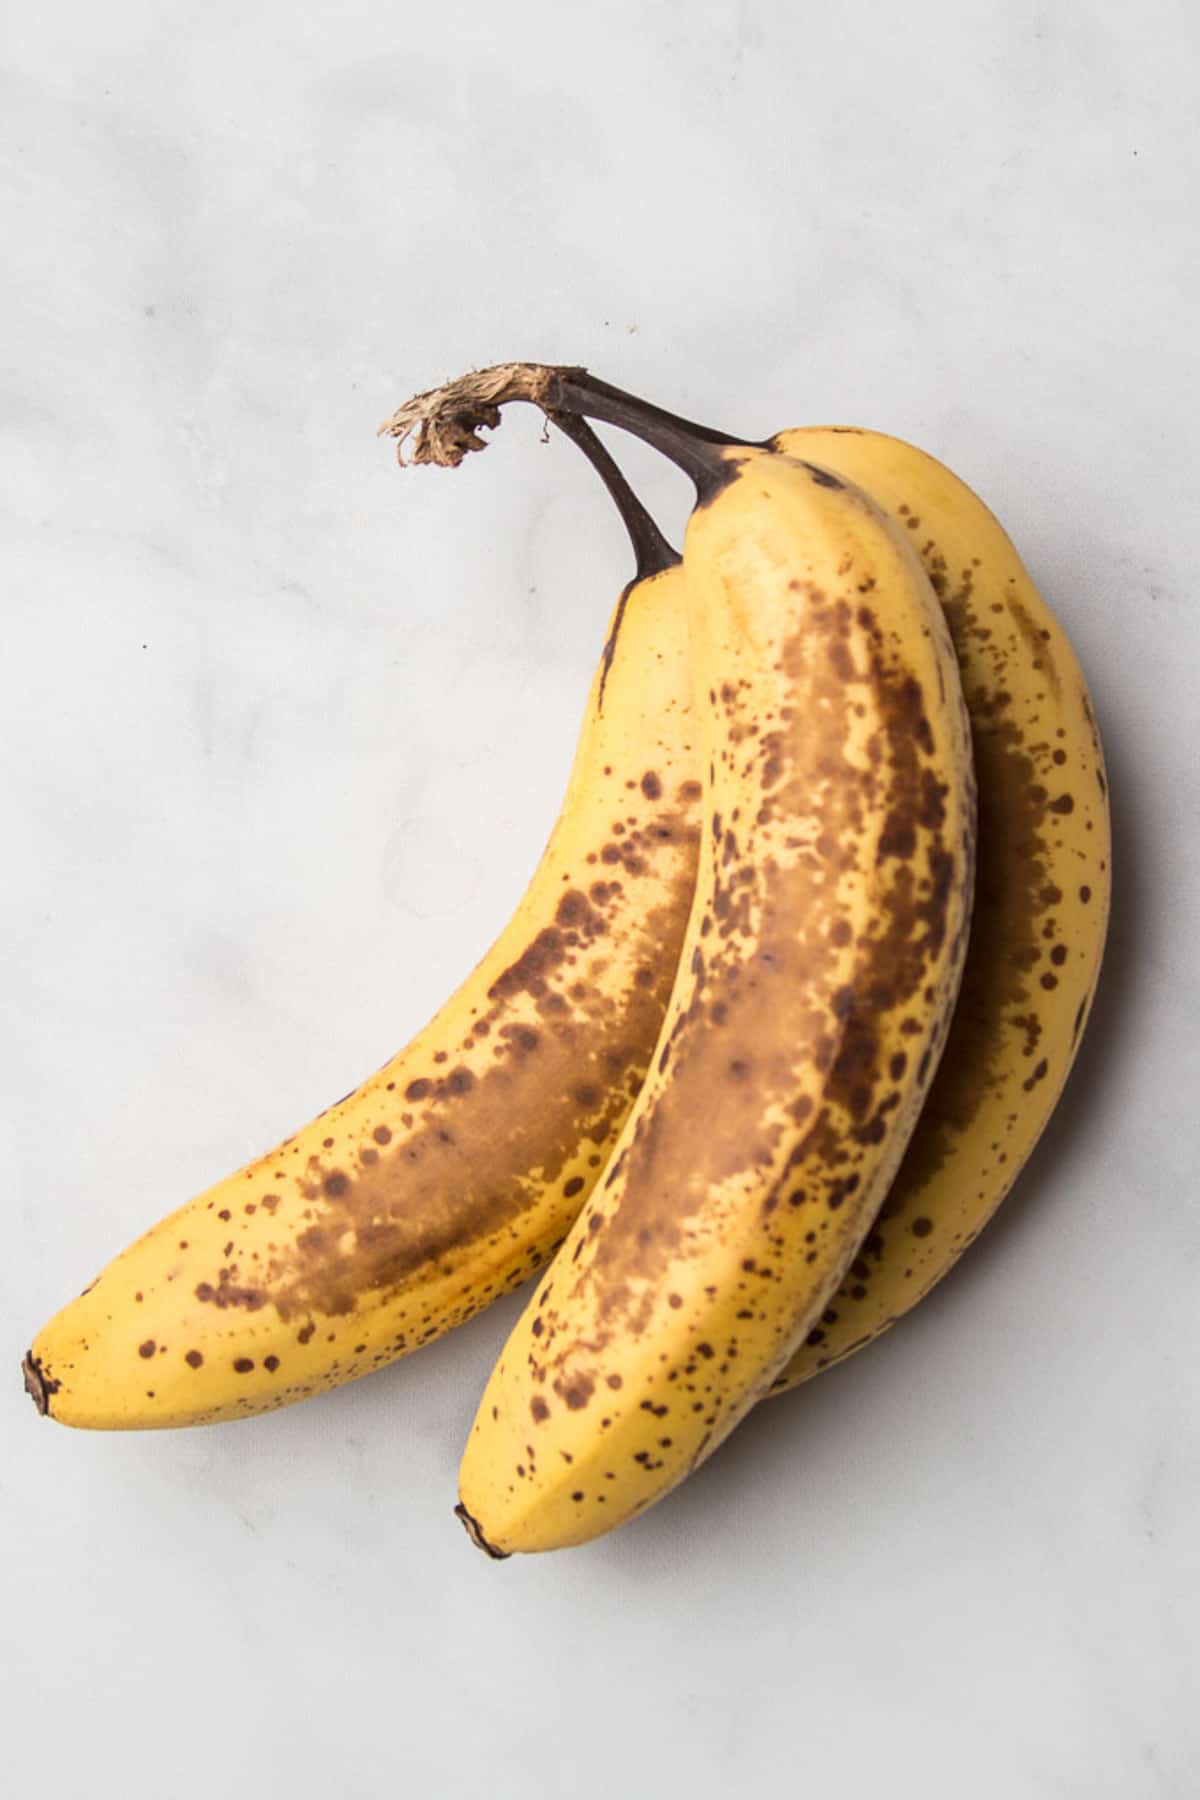 Three overripe bananas sitting on a marble surface.